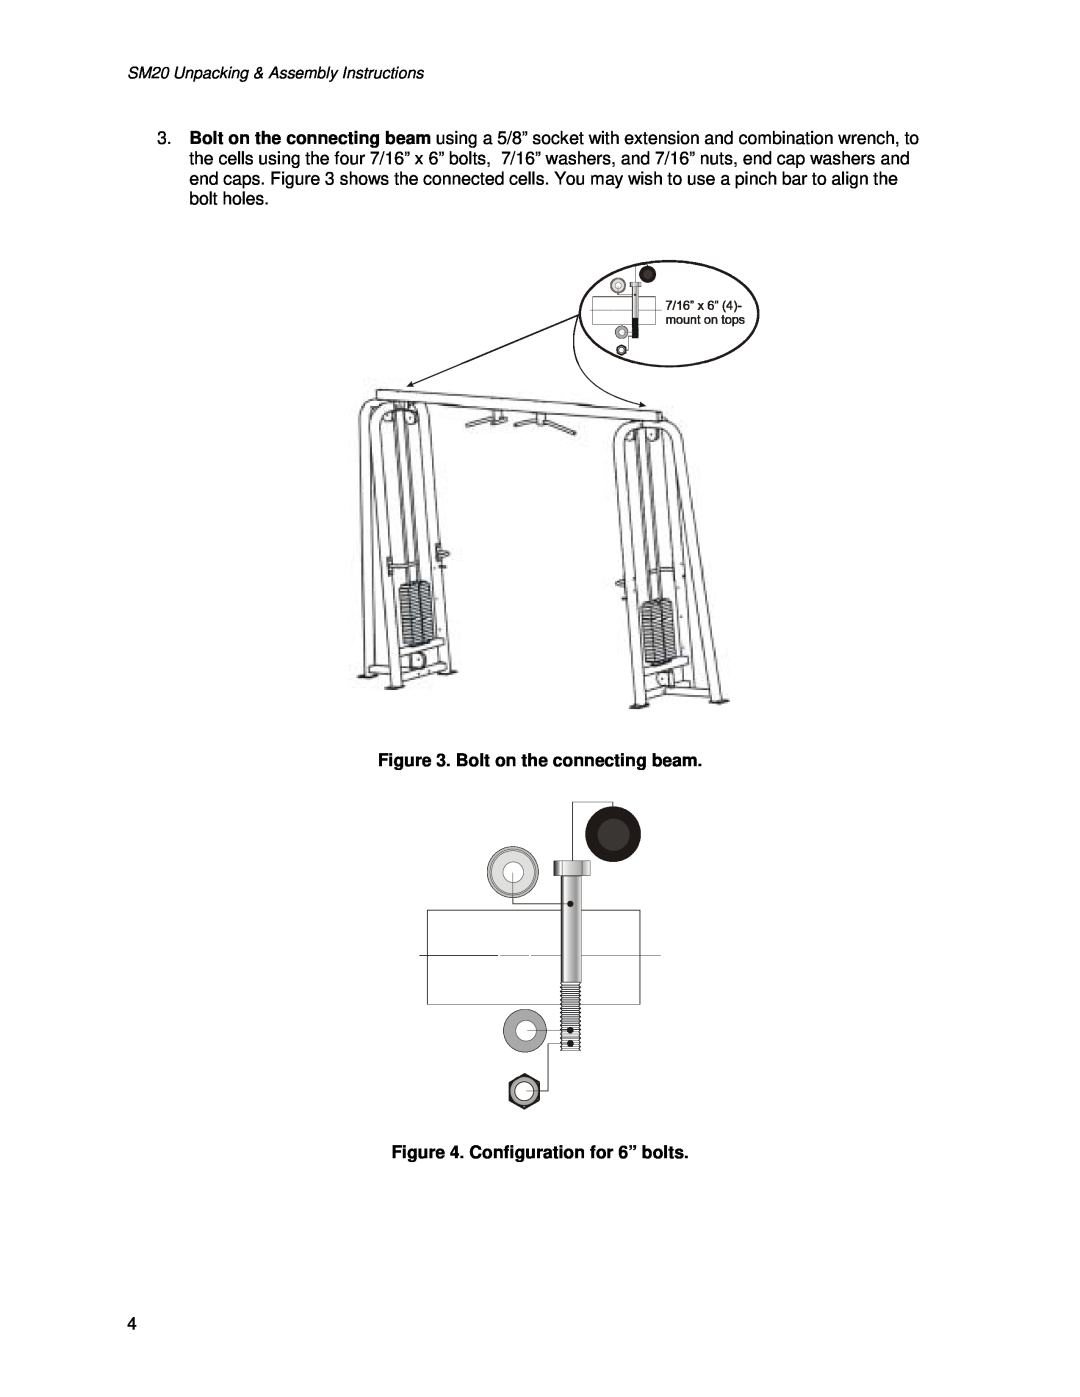 Life Fitness manual Bolt on the connecting beam, Configuration for 6” bolts, SM20 Unpacking & Assembly Instructions 